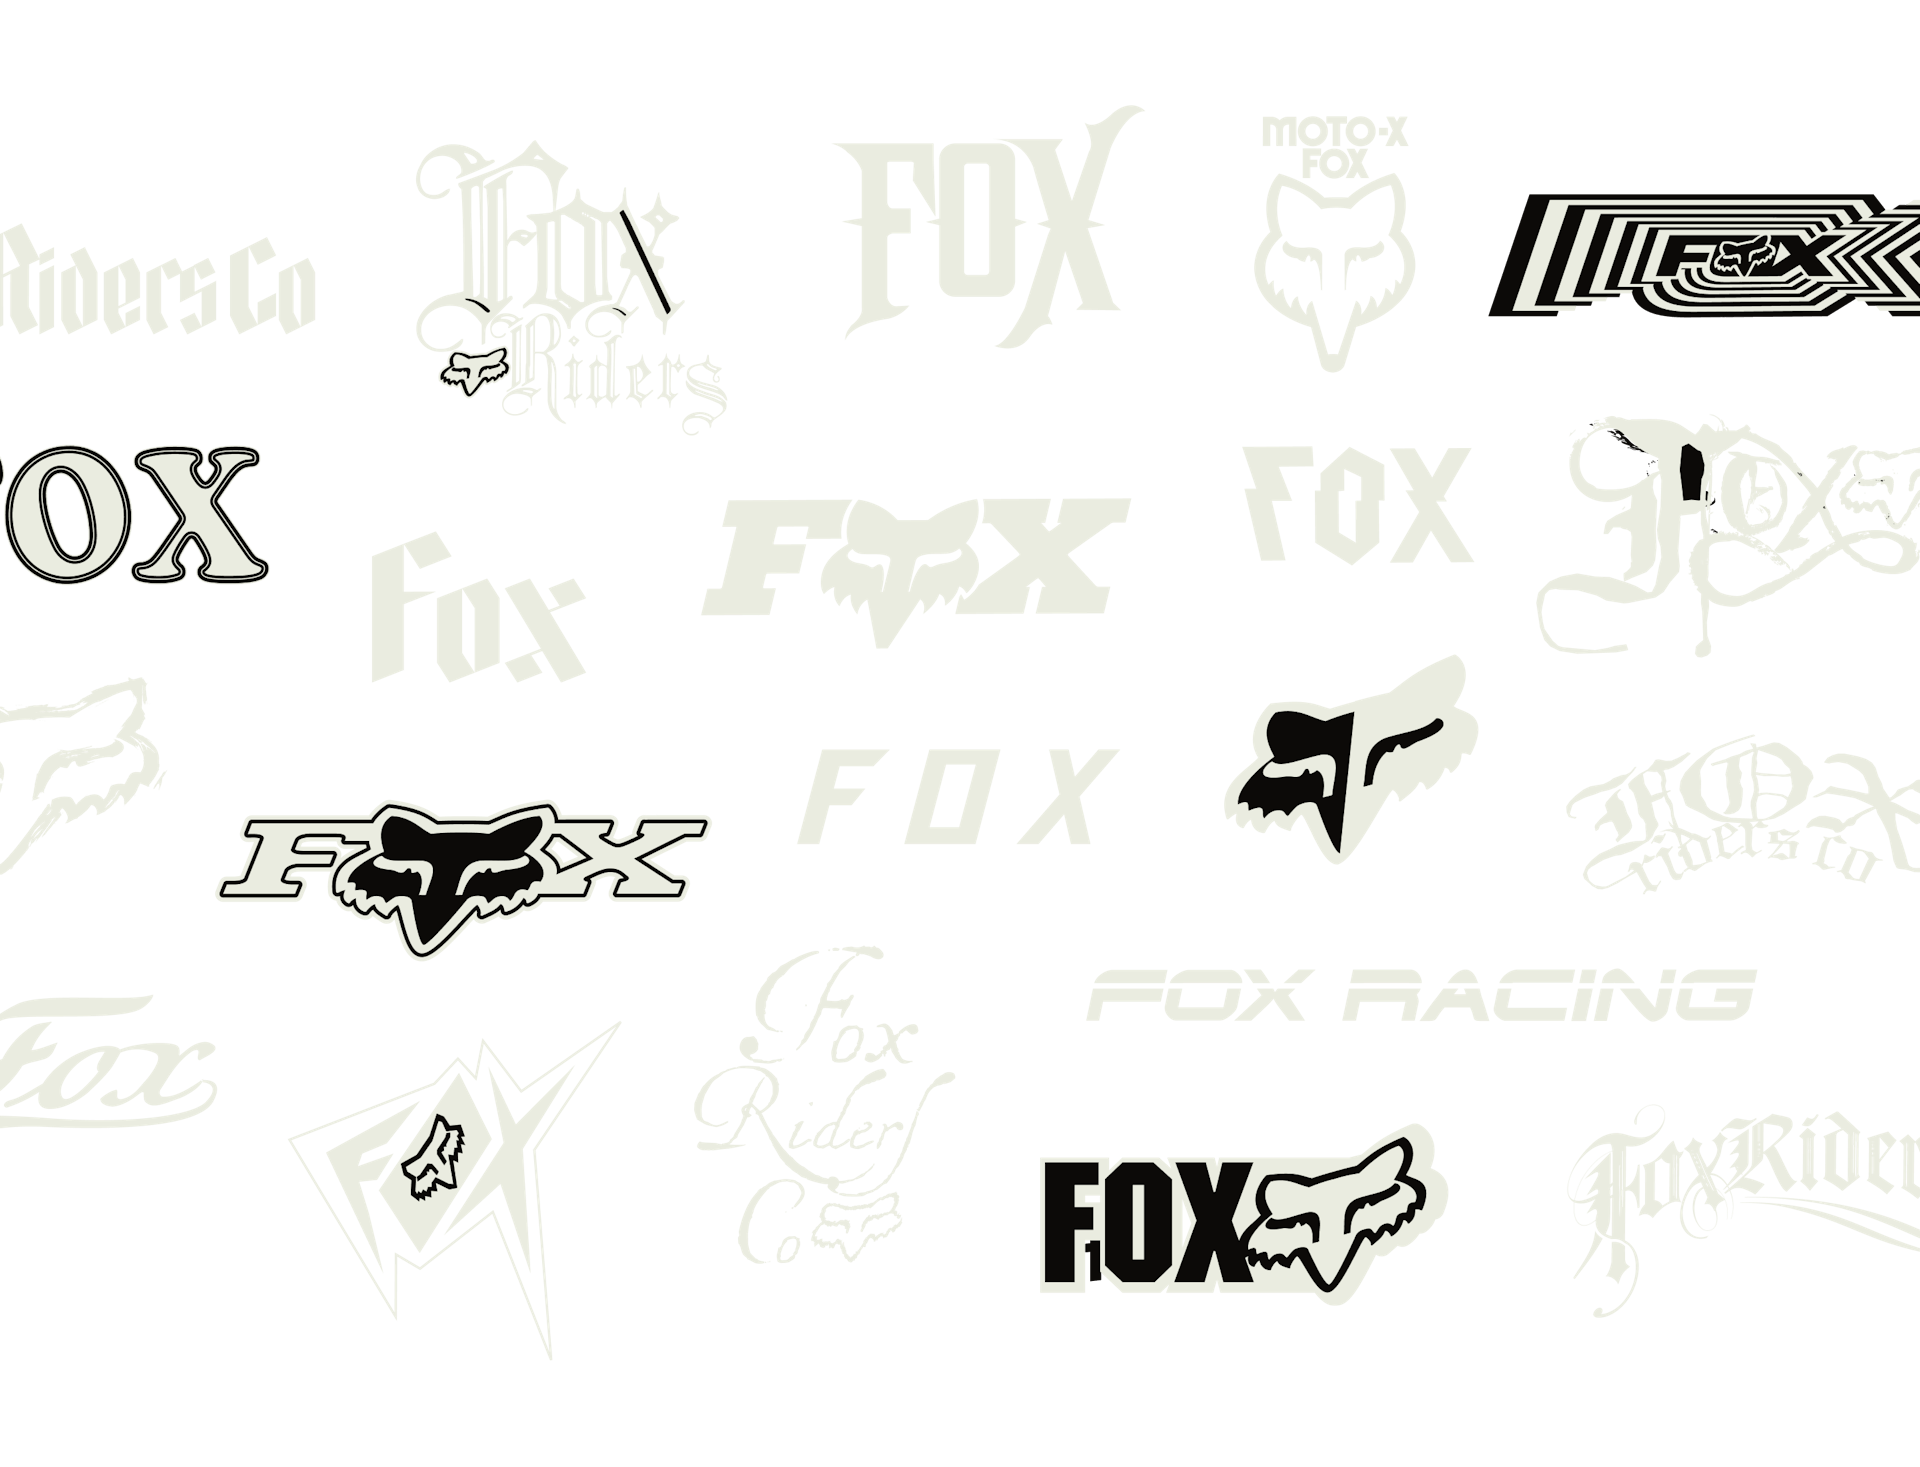 Fox Racing HQ Tour - Behind The Brand